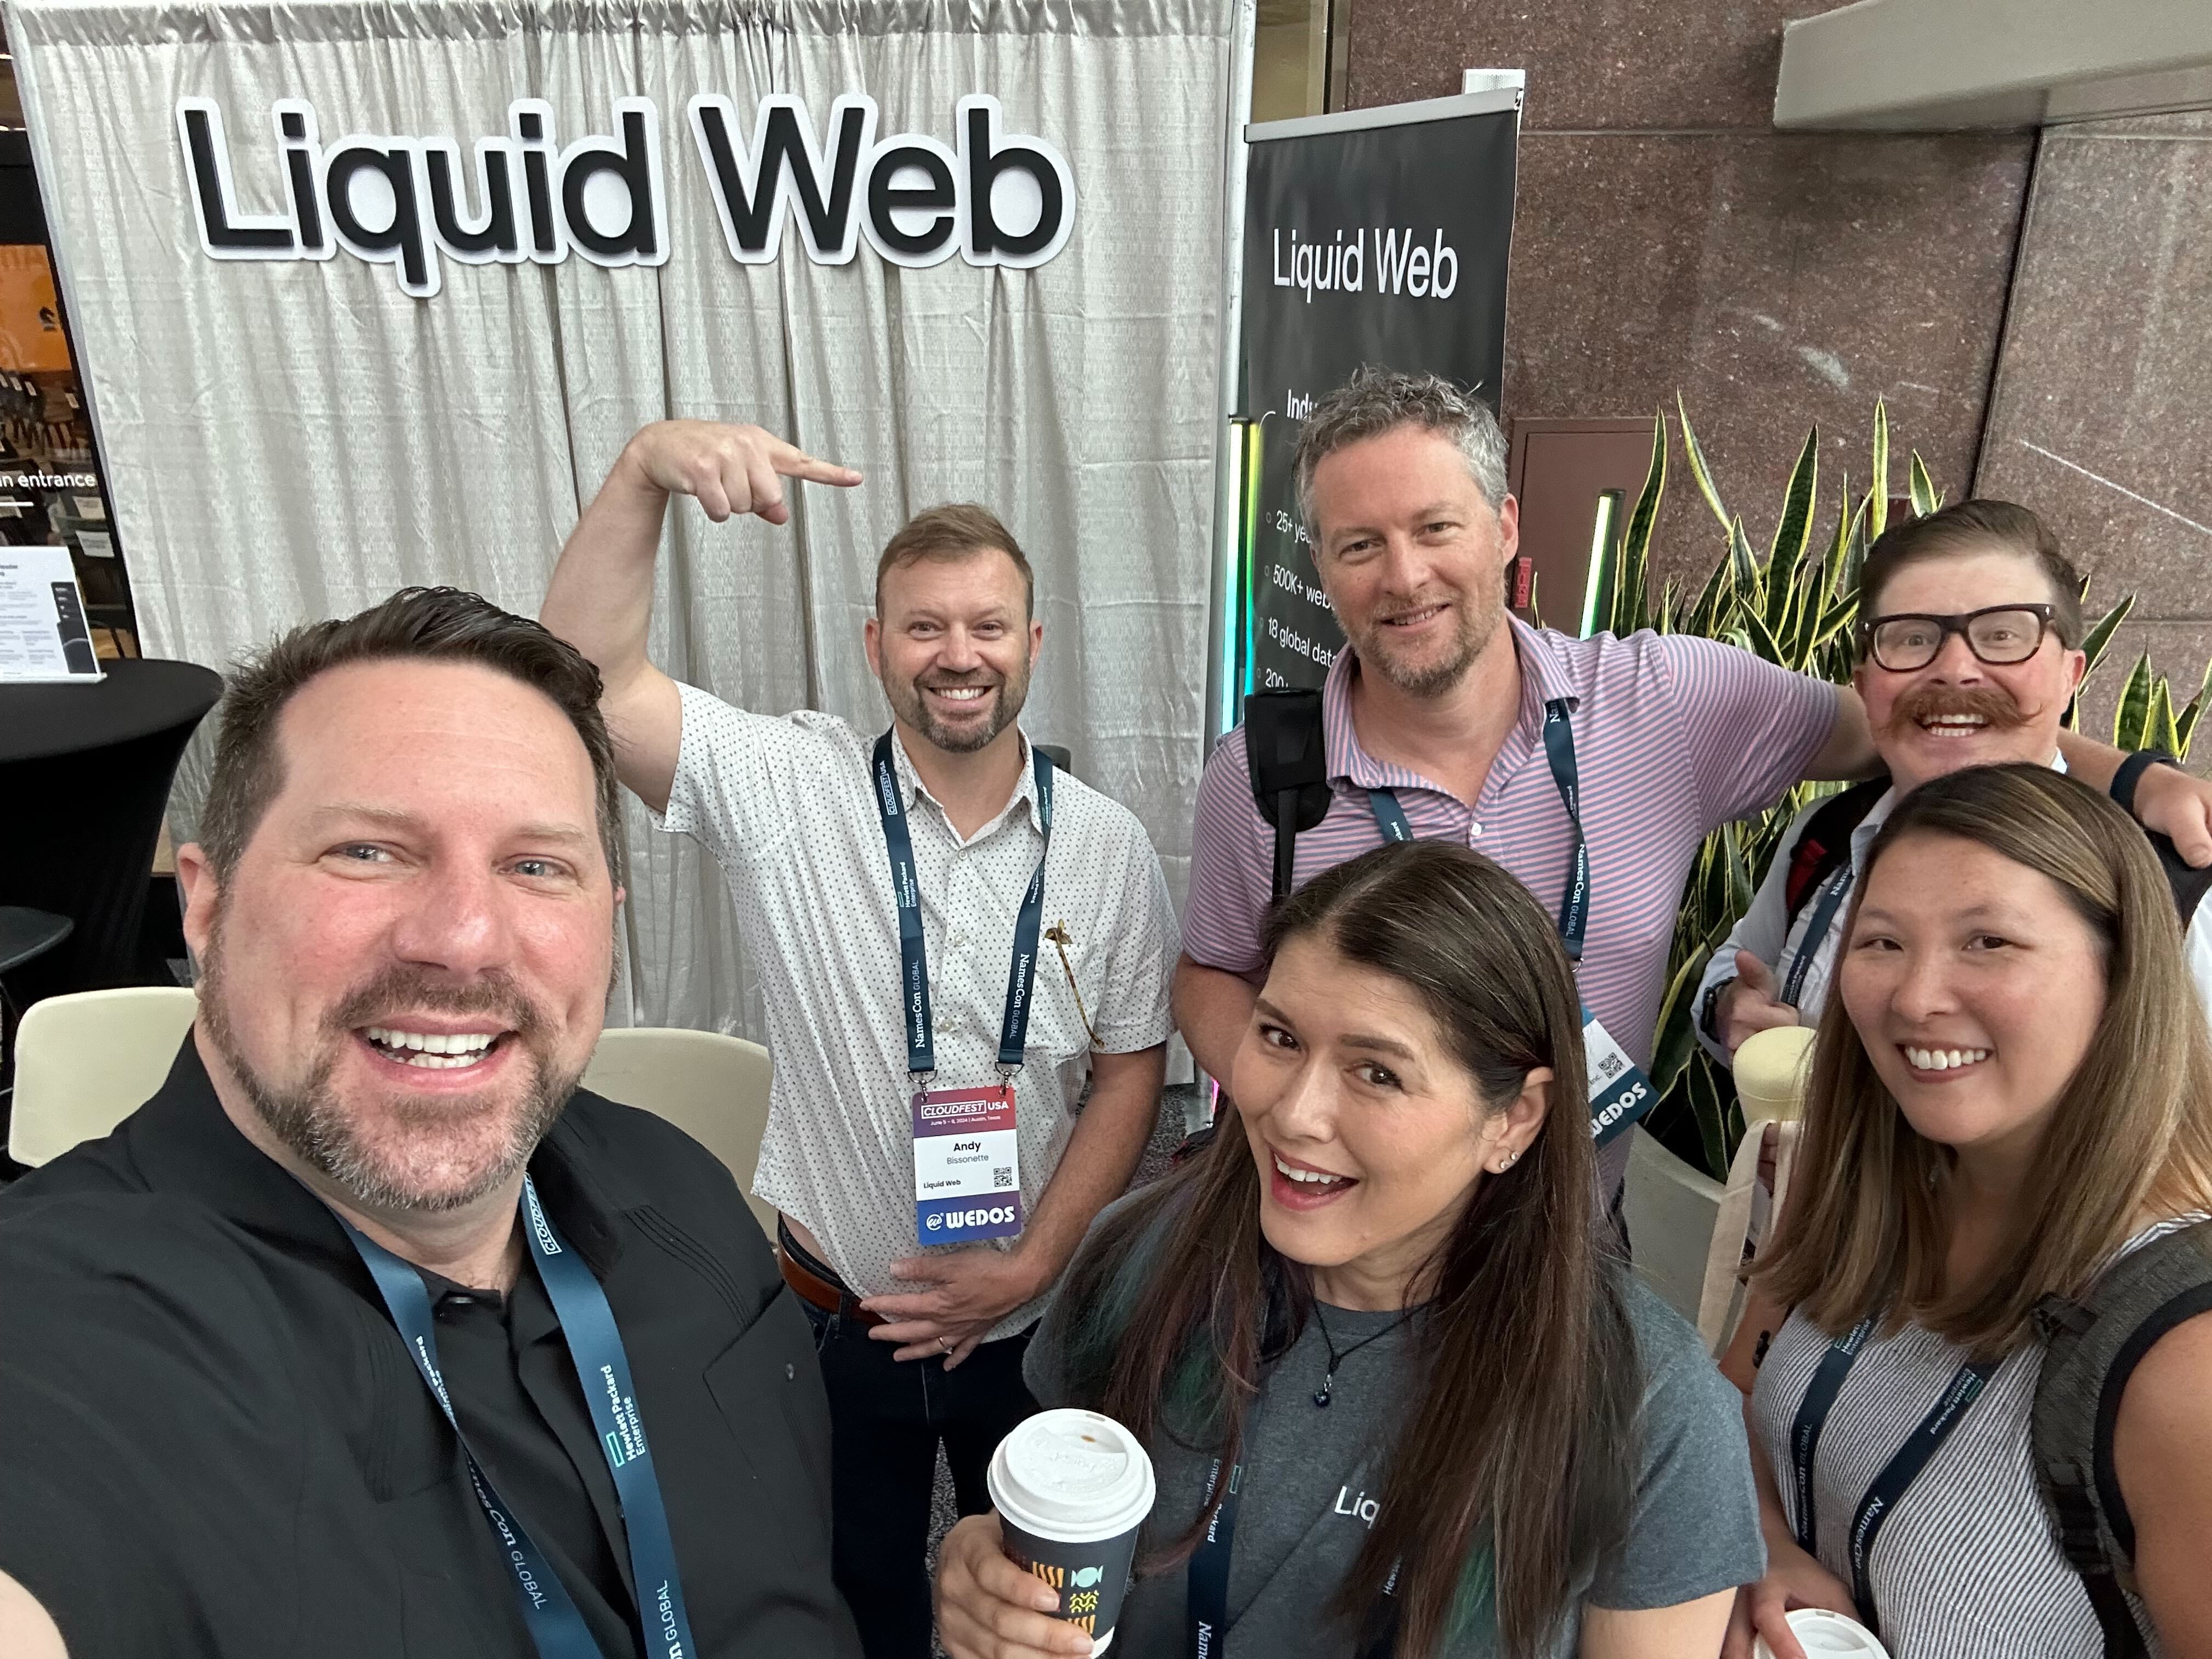 A few members of the Liquid Web team pose for a photo with friends at their booth